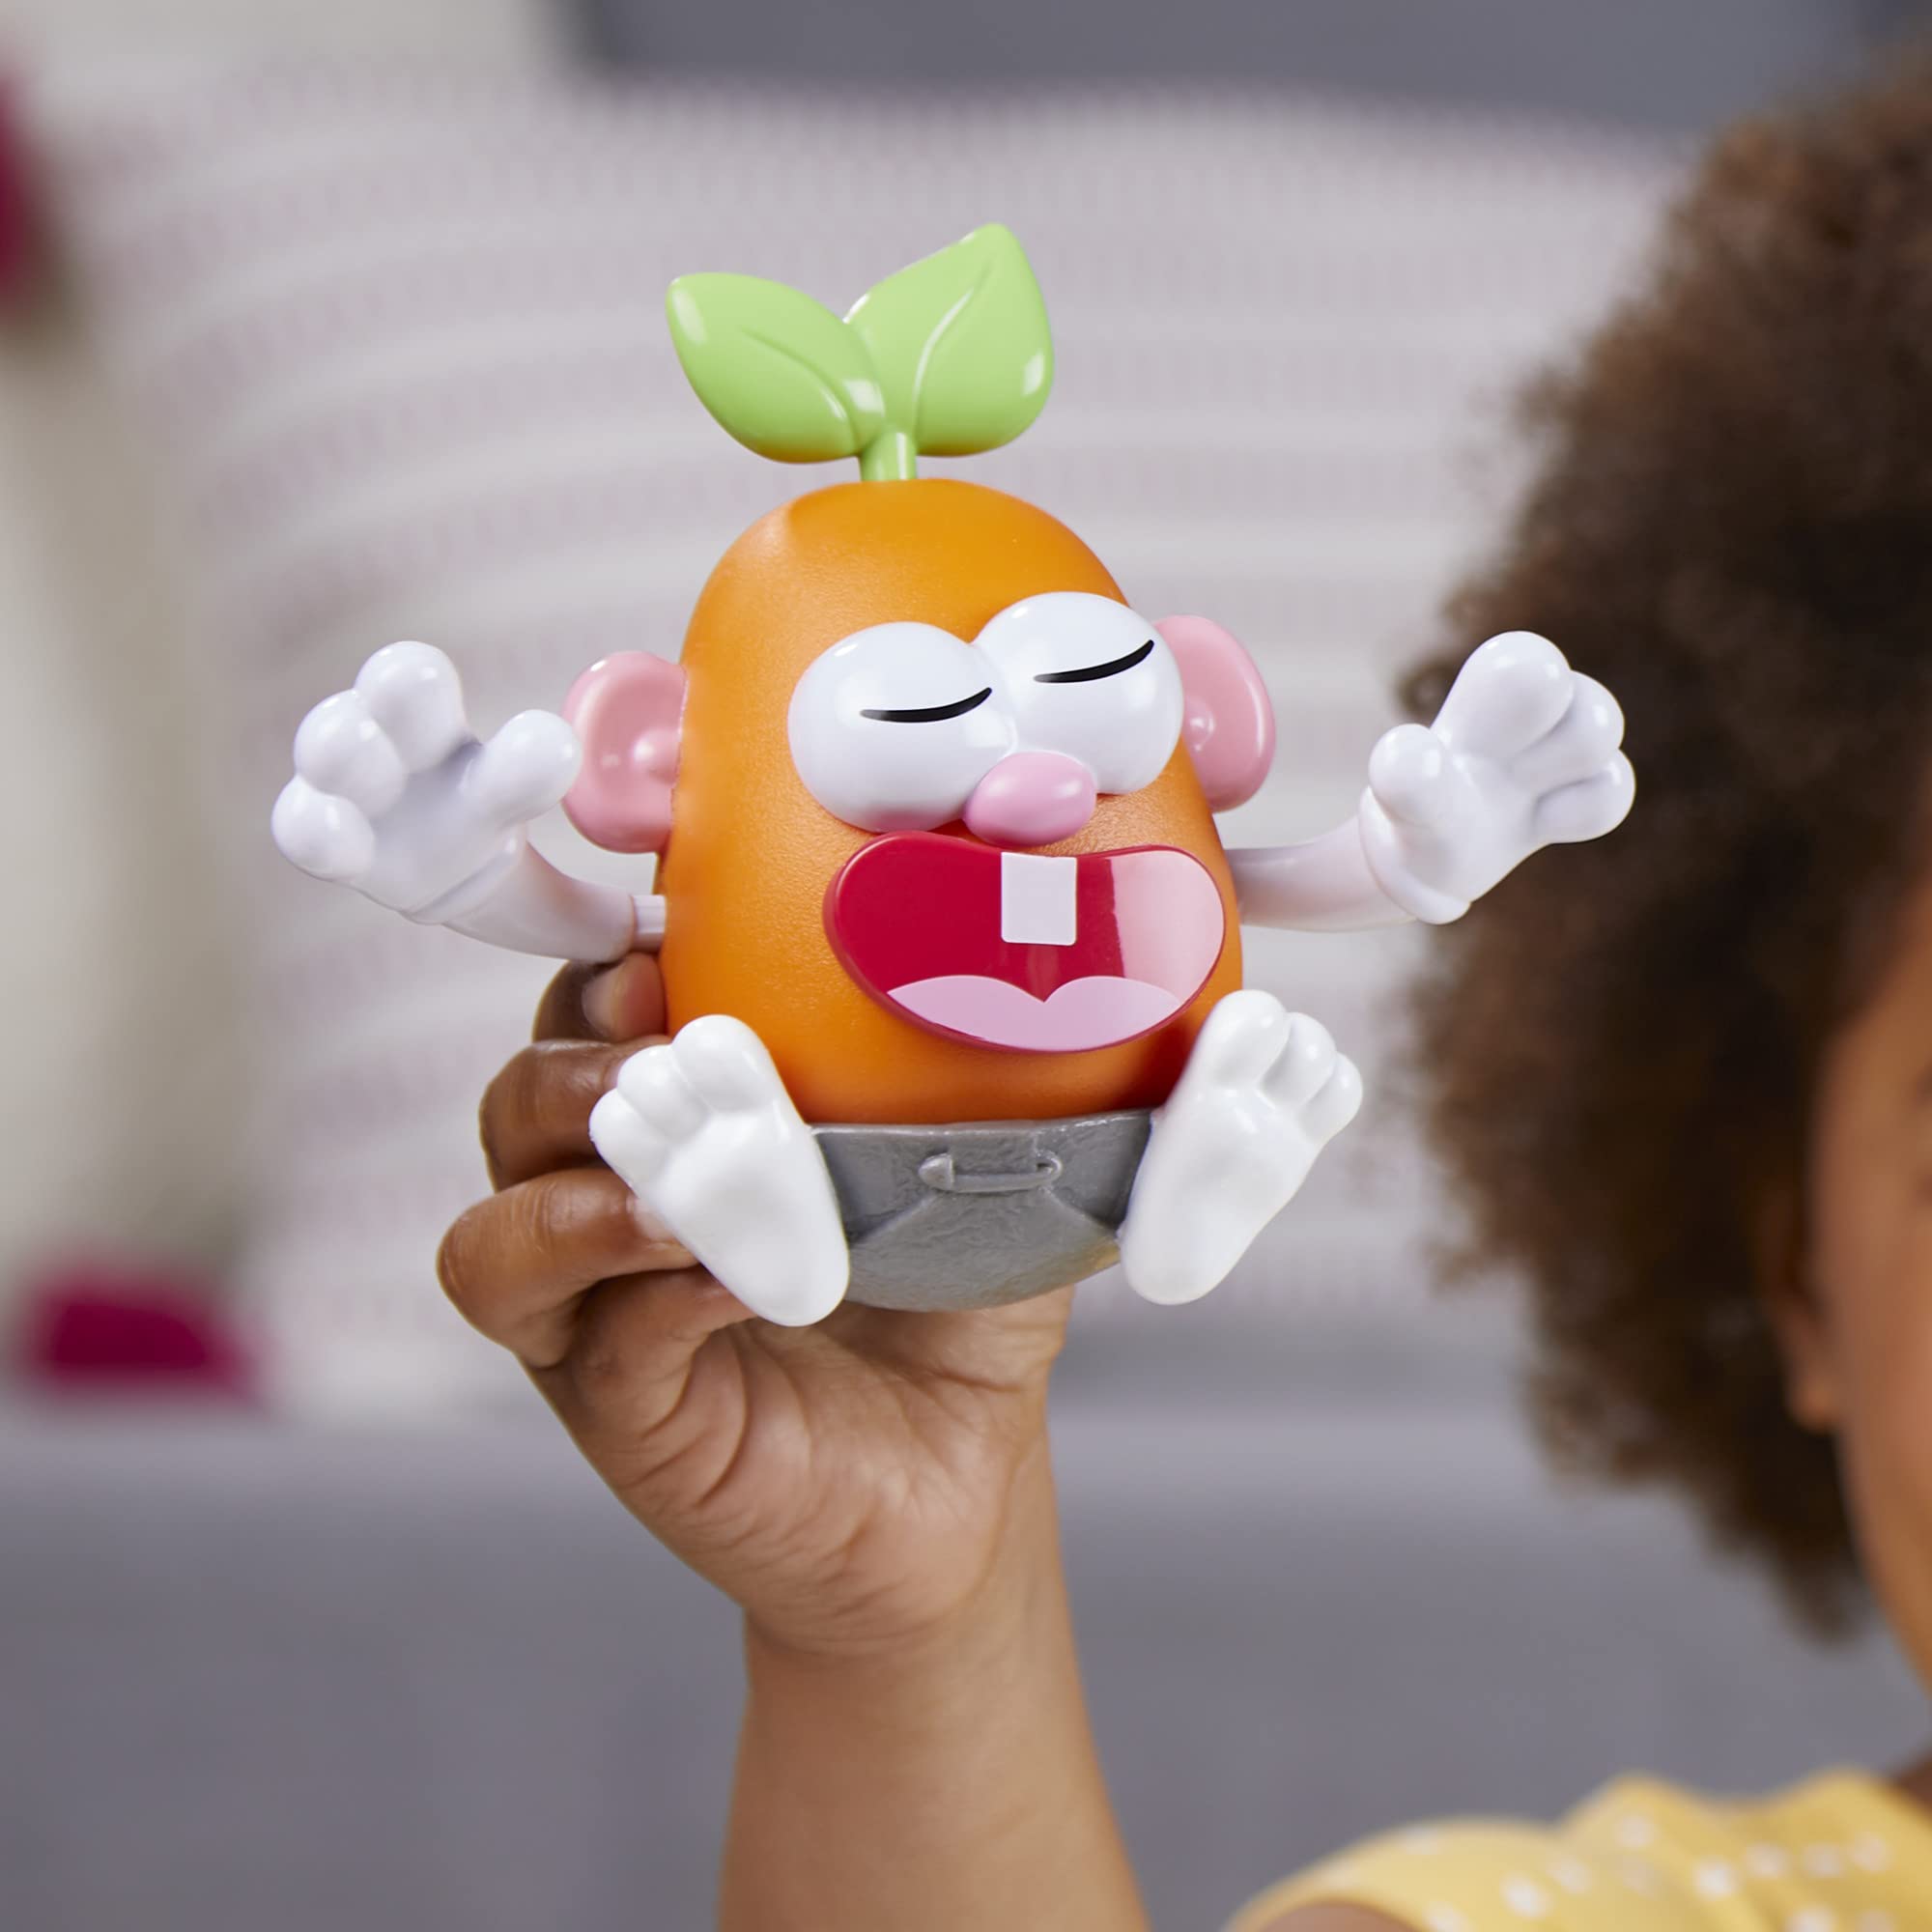 Potato Head Create Your Potato Head Family Toy For Kids Ages 2 and Up, Includes 45 Pieces to Create and Customize Potato Families